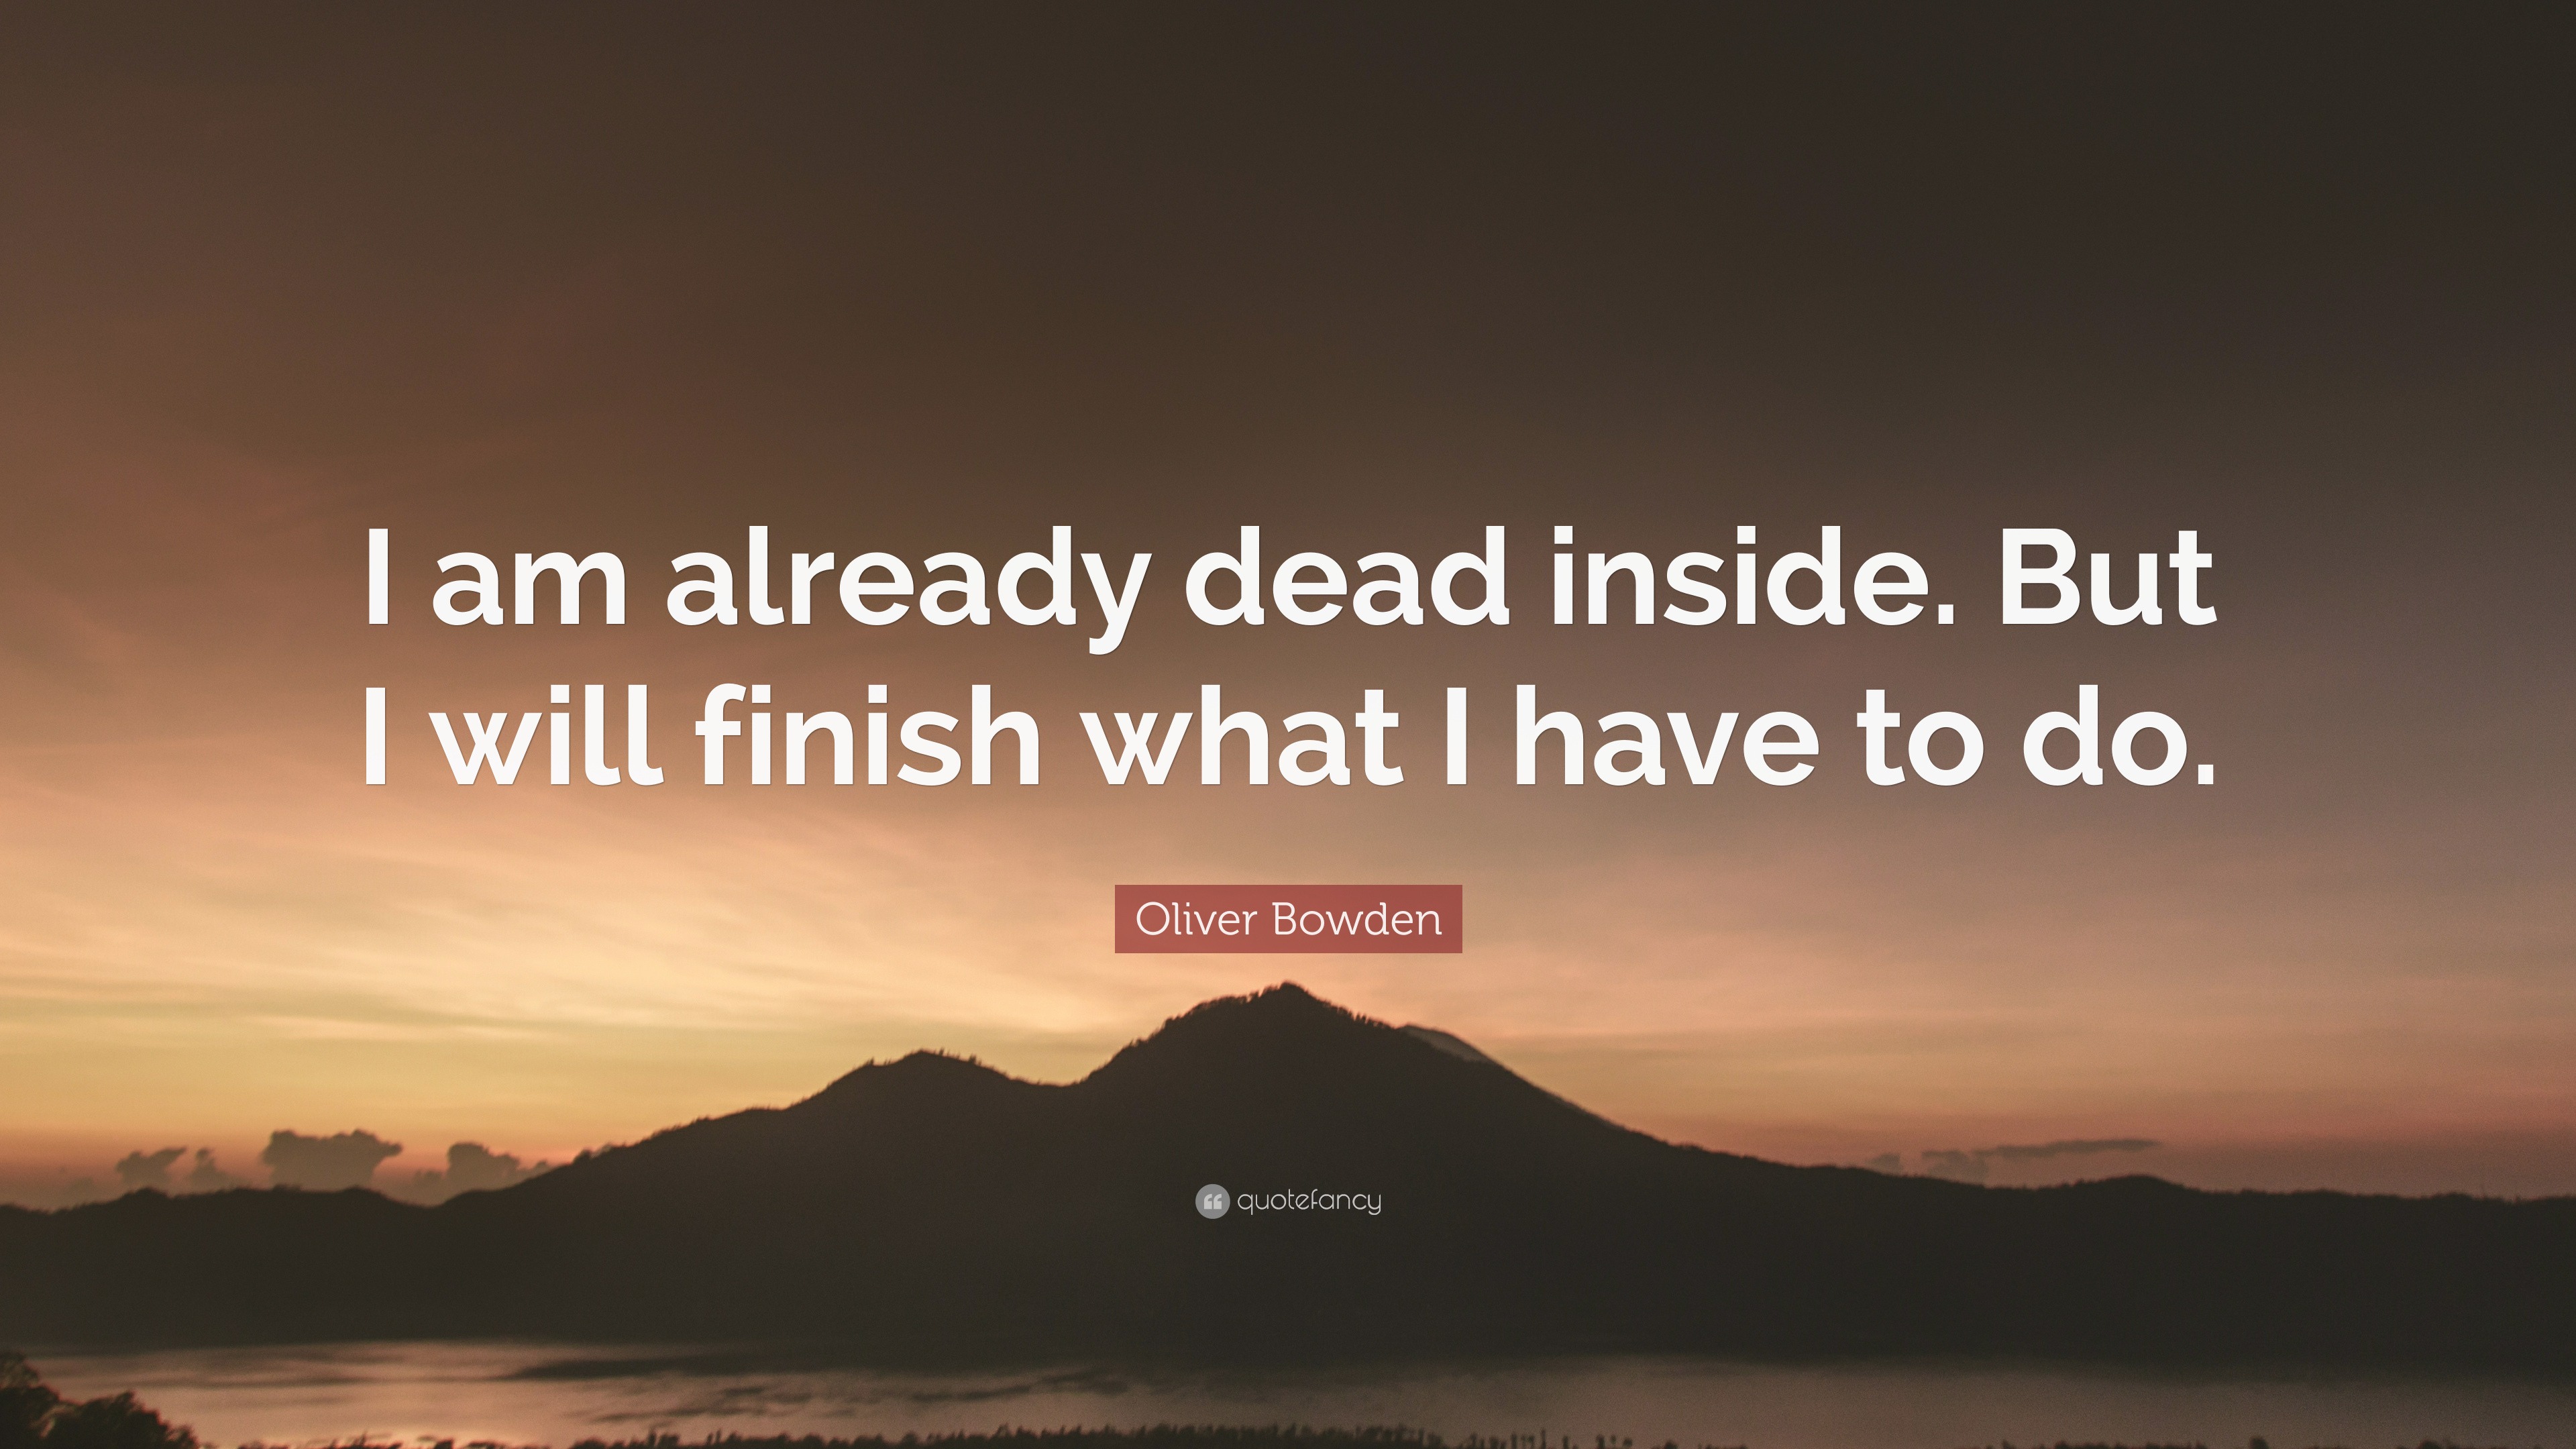 Oliver Bowden Quote: “I am already dead inside. But I will finish what I  have to